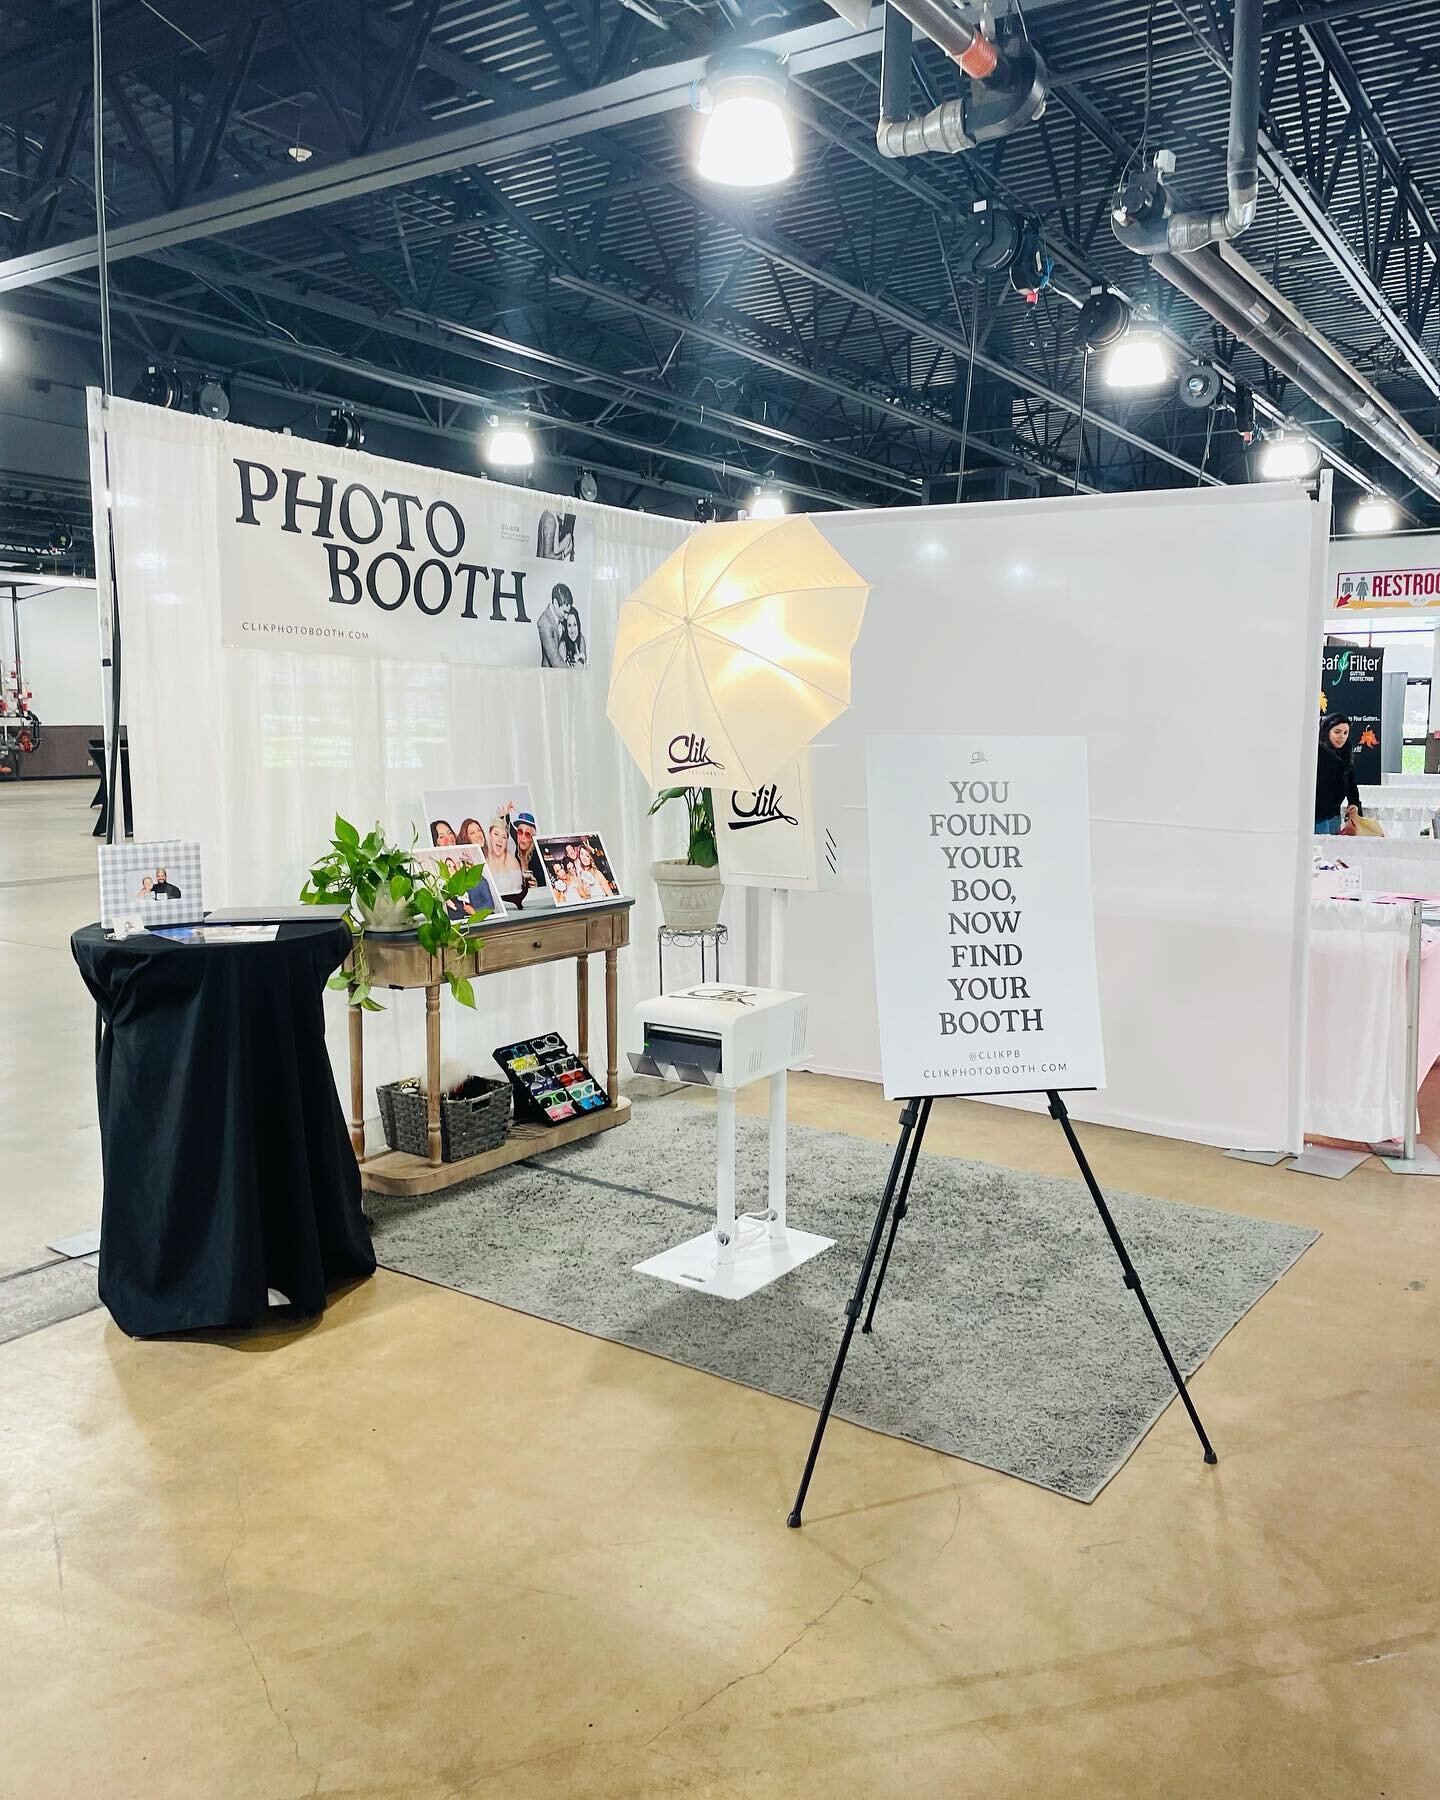 This weekend we got to attend an amazing wedding expo where we met so many brides! 🤩🎉 

Do you know any 2023 brides? Send them our way! Weddings are our favorite events! 🥰🎉🫶🏽💍💒